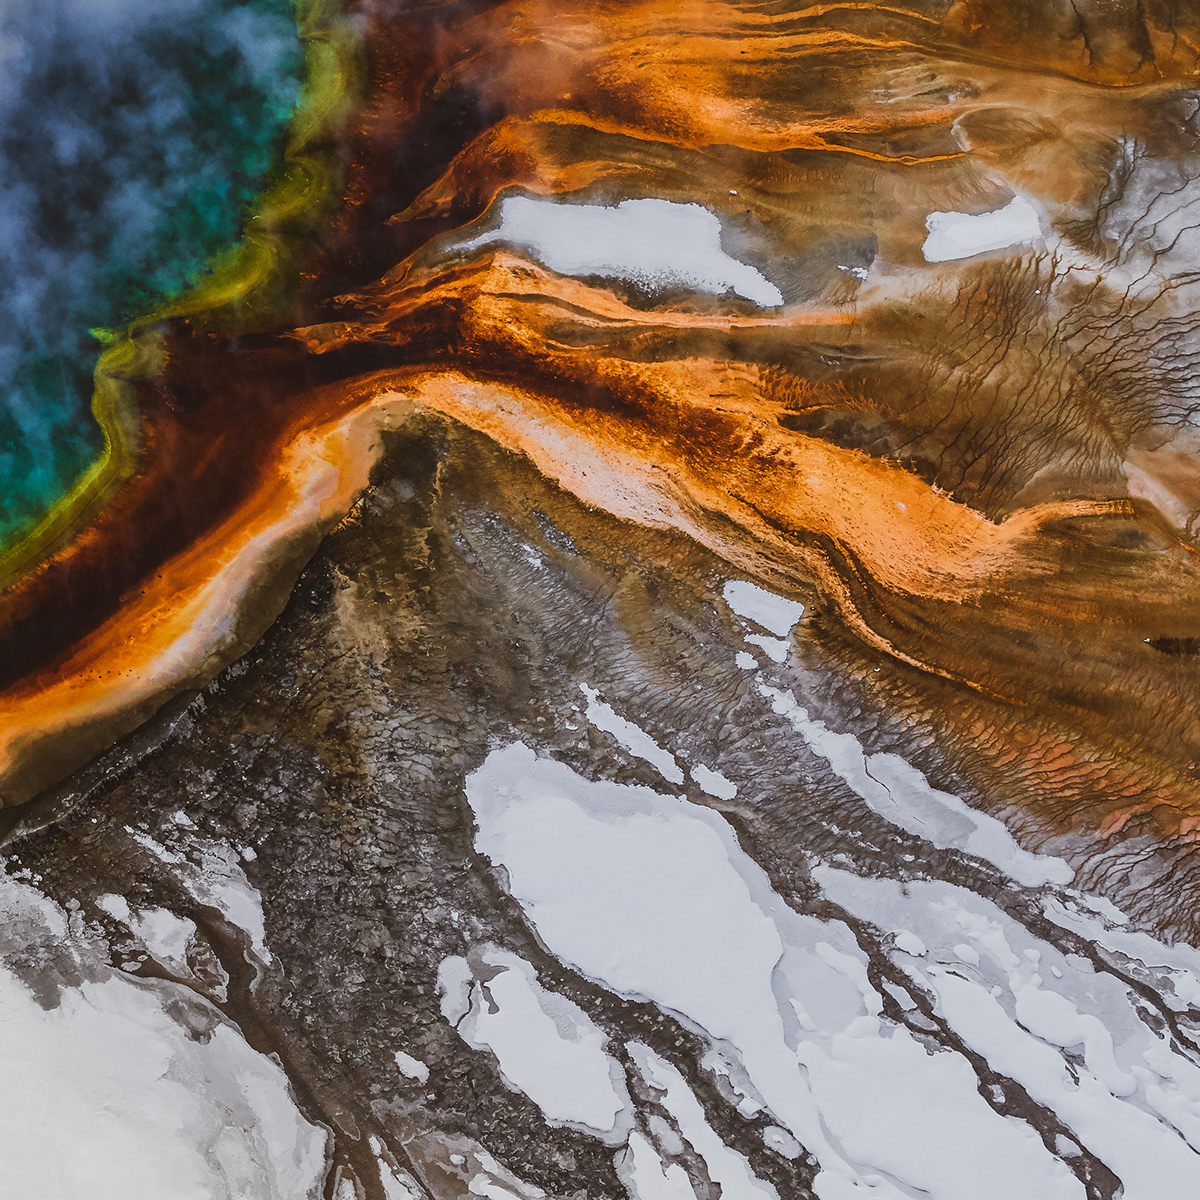 aerial forest photos aerial national parks Fine Art Aerial images Fine Art Photographs flying over yellowstone Grand Prismatic Spring Mitch Rouse Aerials snowy yellowstone wyoming national parks Yellowstone National Park